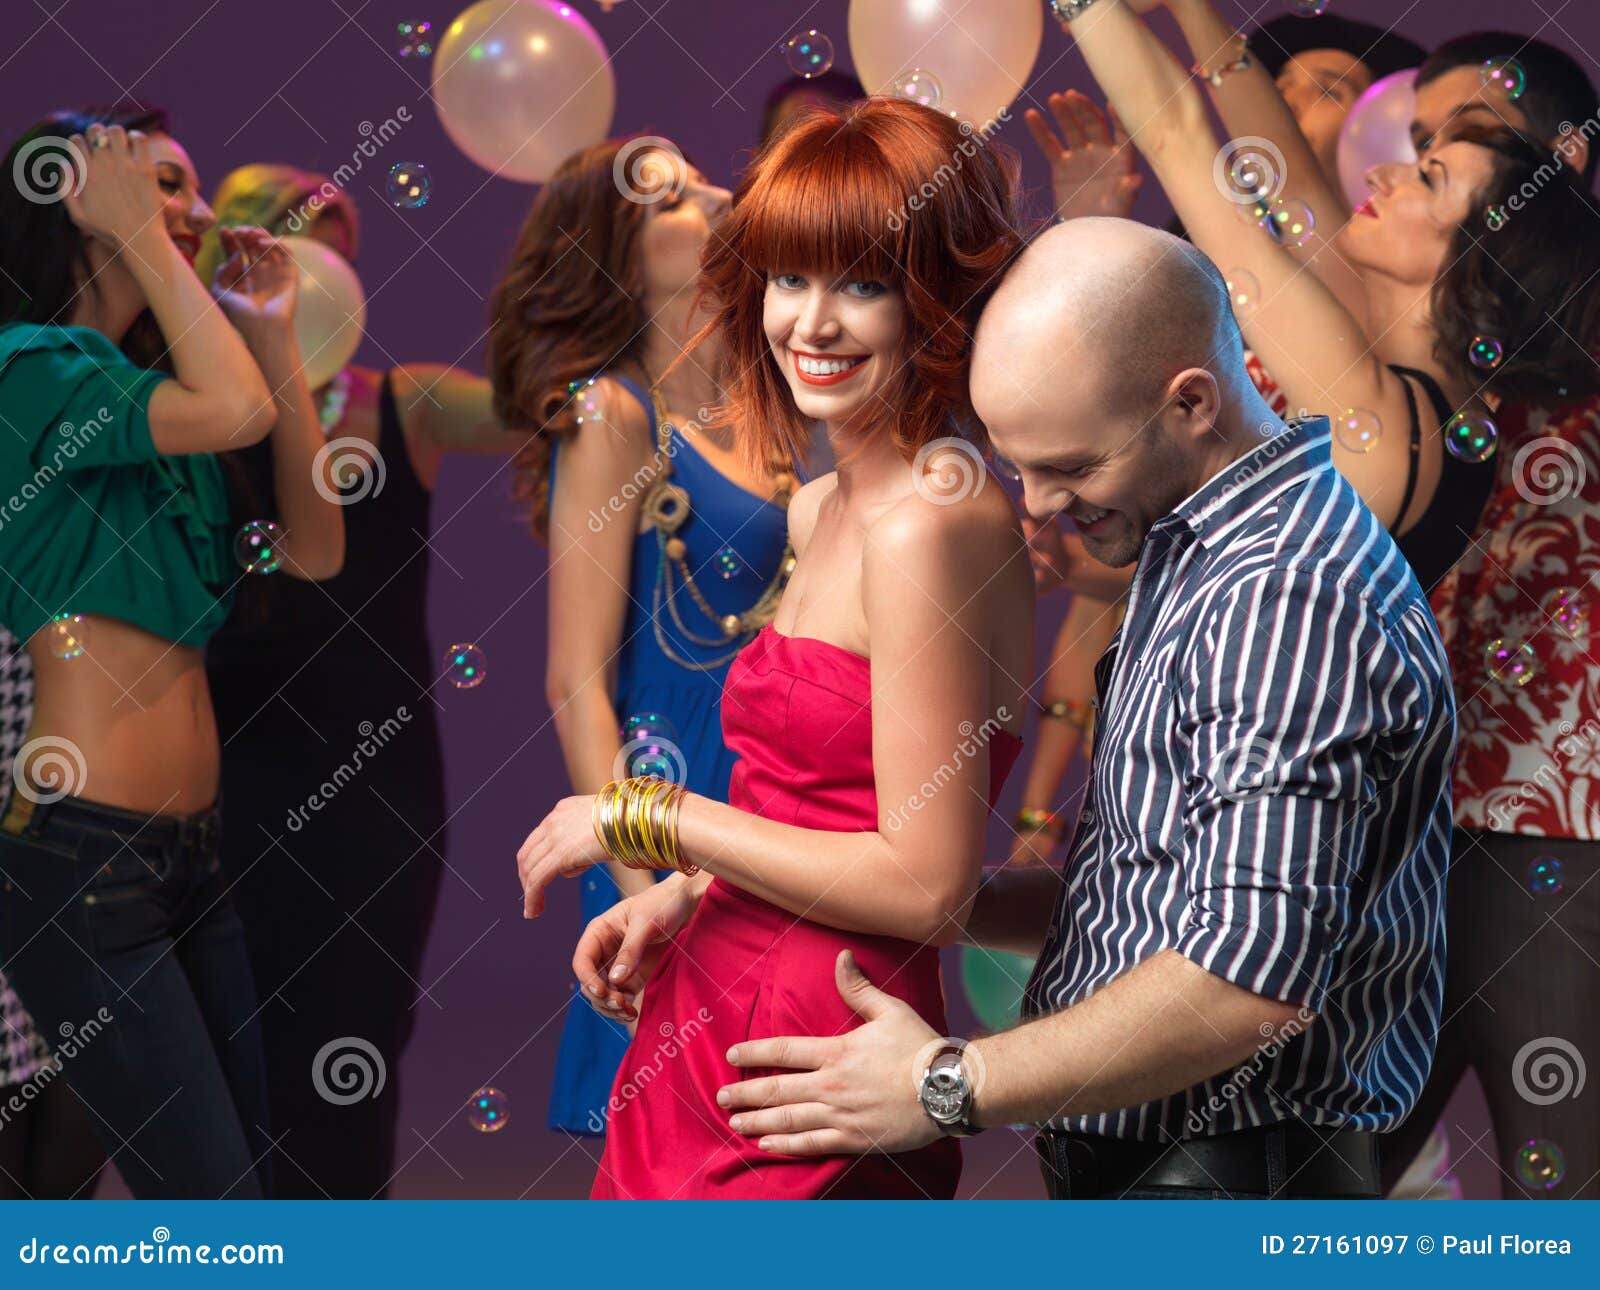 Sexy Couple Dancing Flirting In Night Club Royalty Free Stock Image